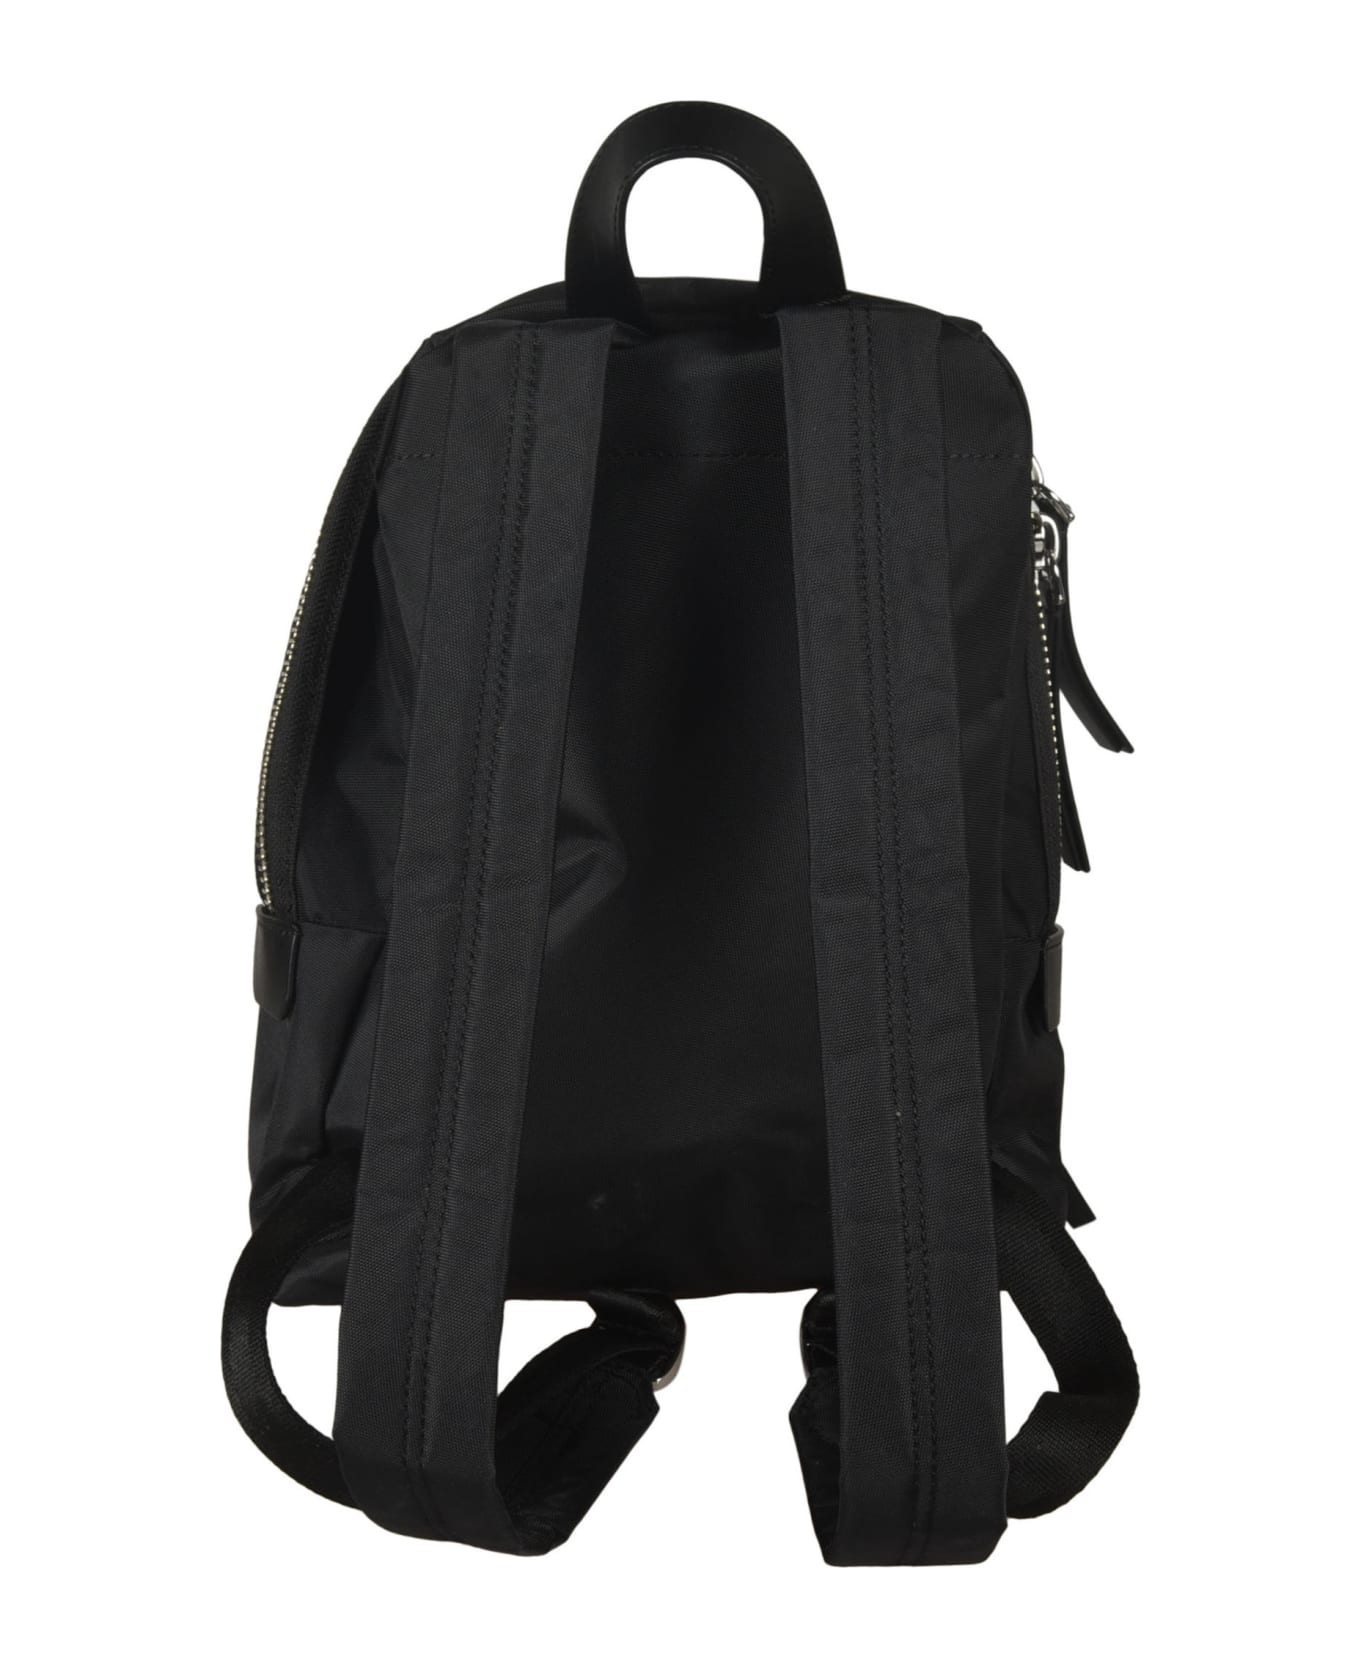 Marc Jacobs Logo Patched Backpack - Black